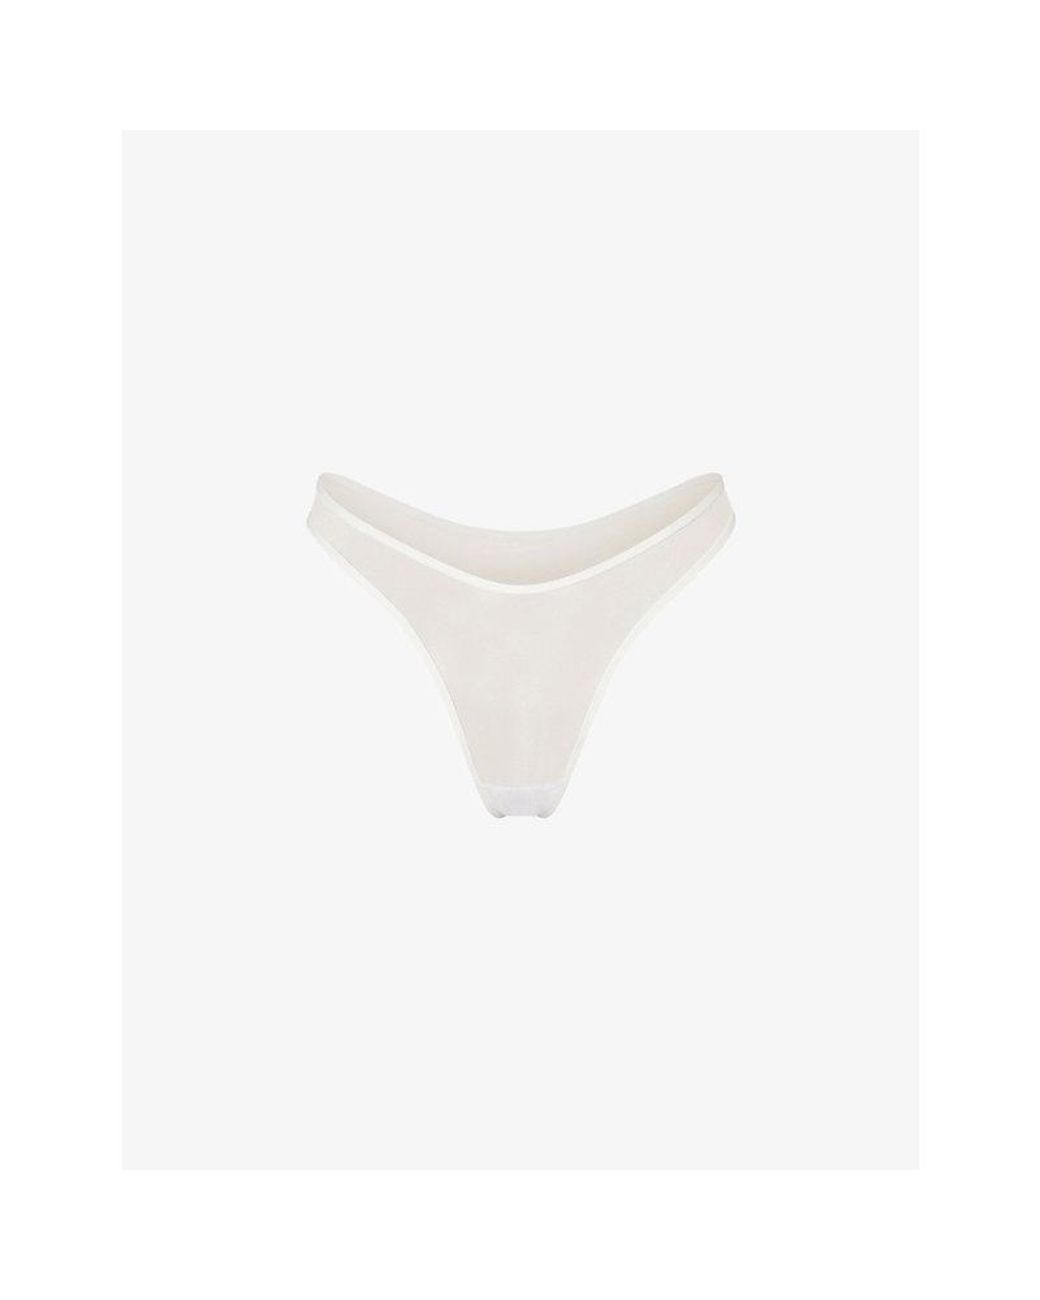 Fits Everybody lace-trimmed stretch thong - Marble